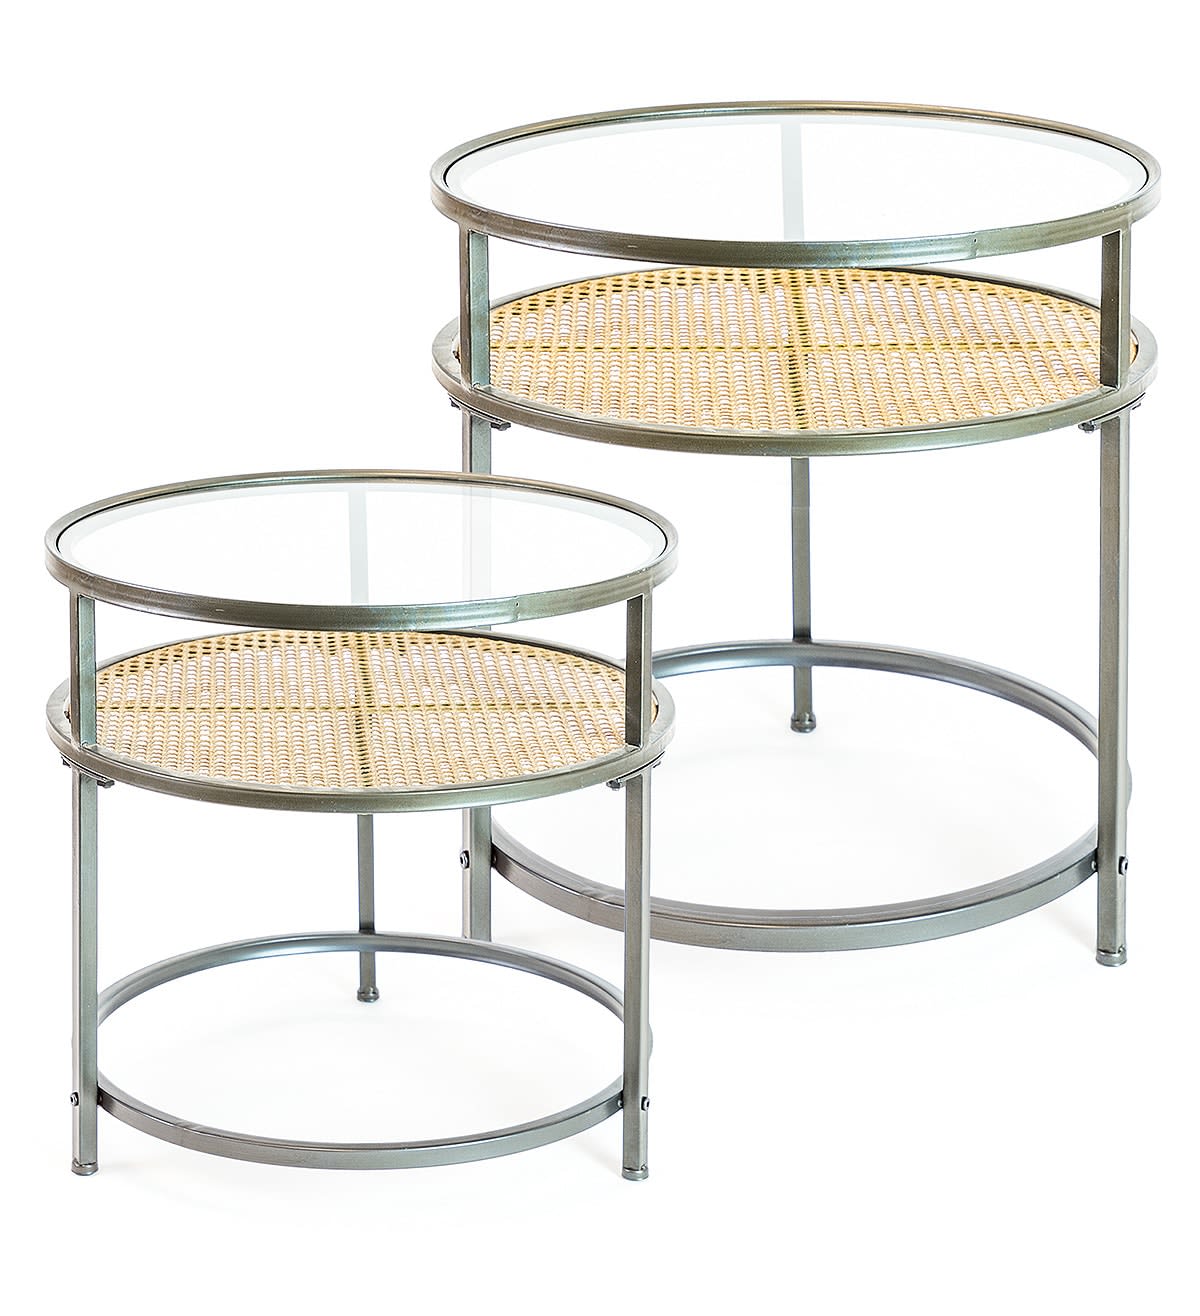 Lilian Rustic Metal and Rattan Nest of Tables